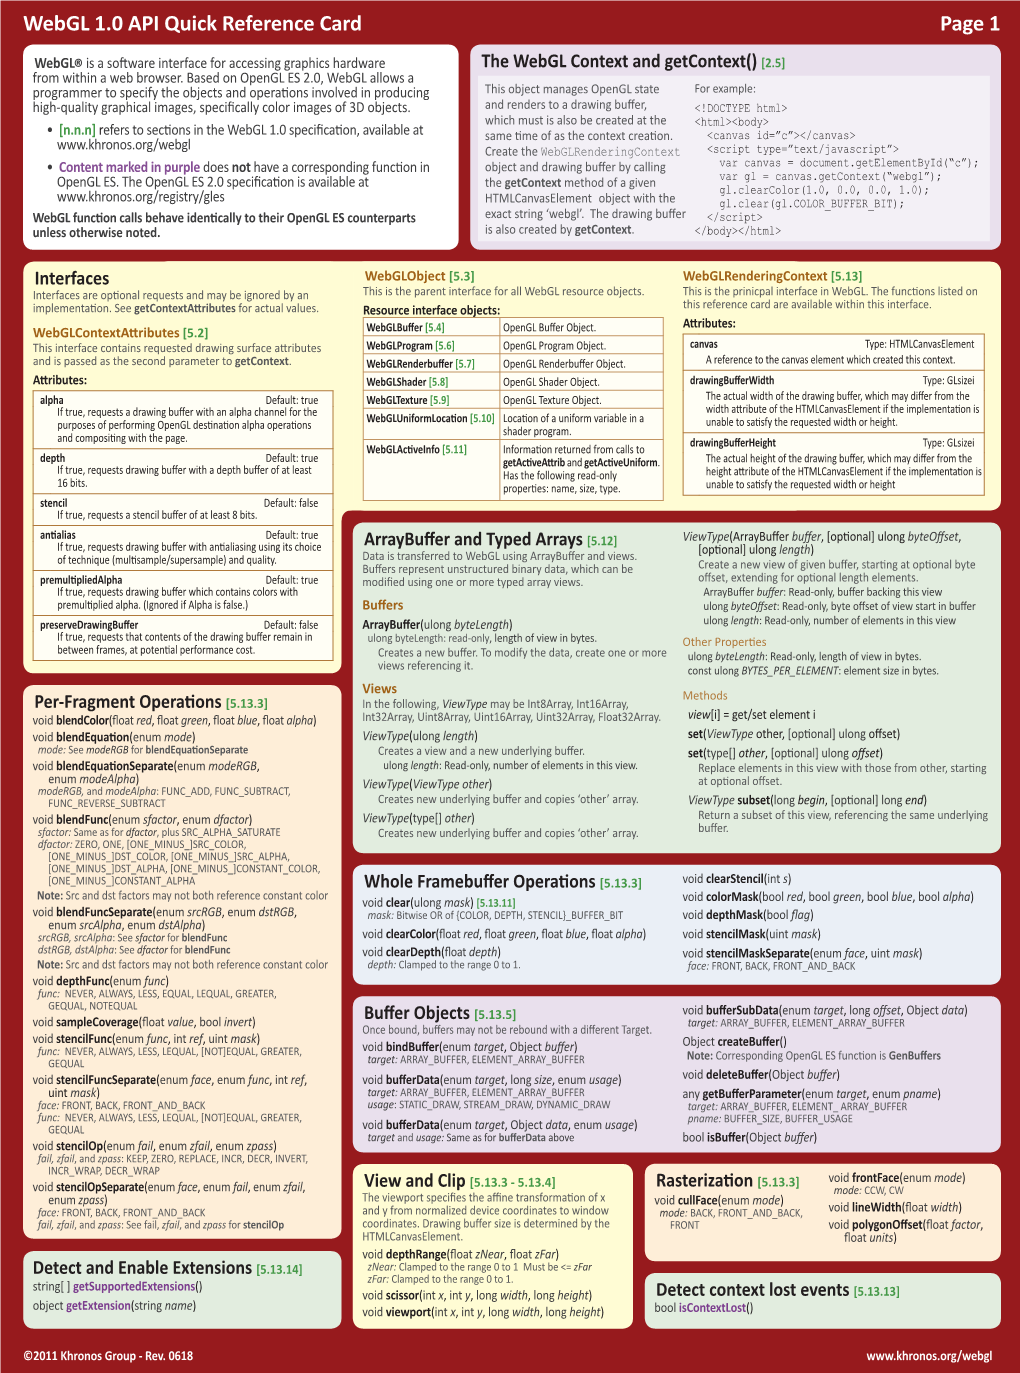 Webgl 1.0 API Quick Reference Card Page 1